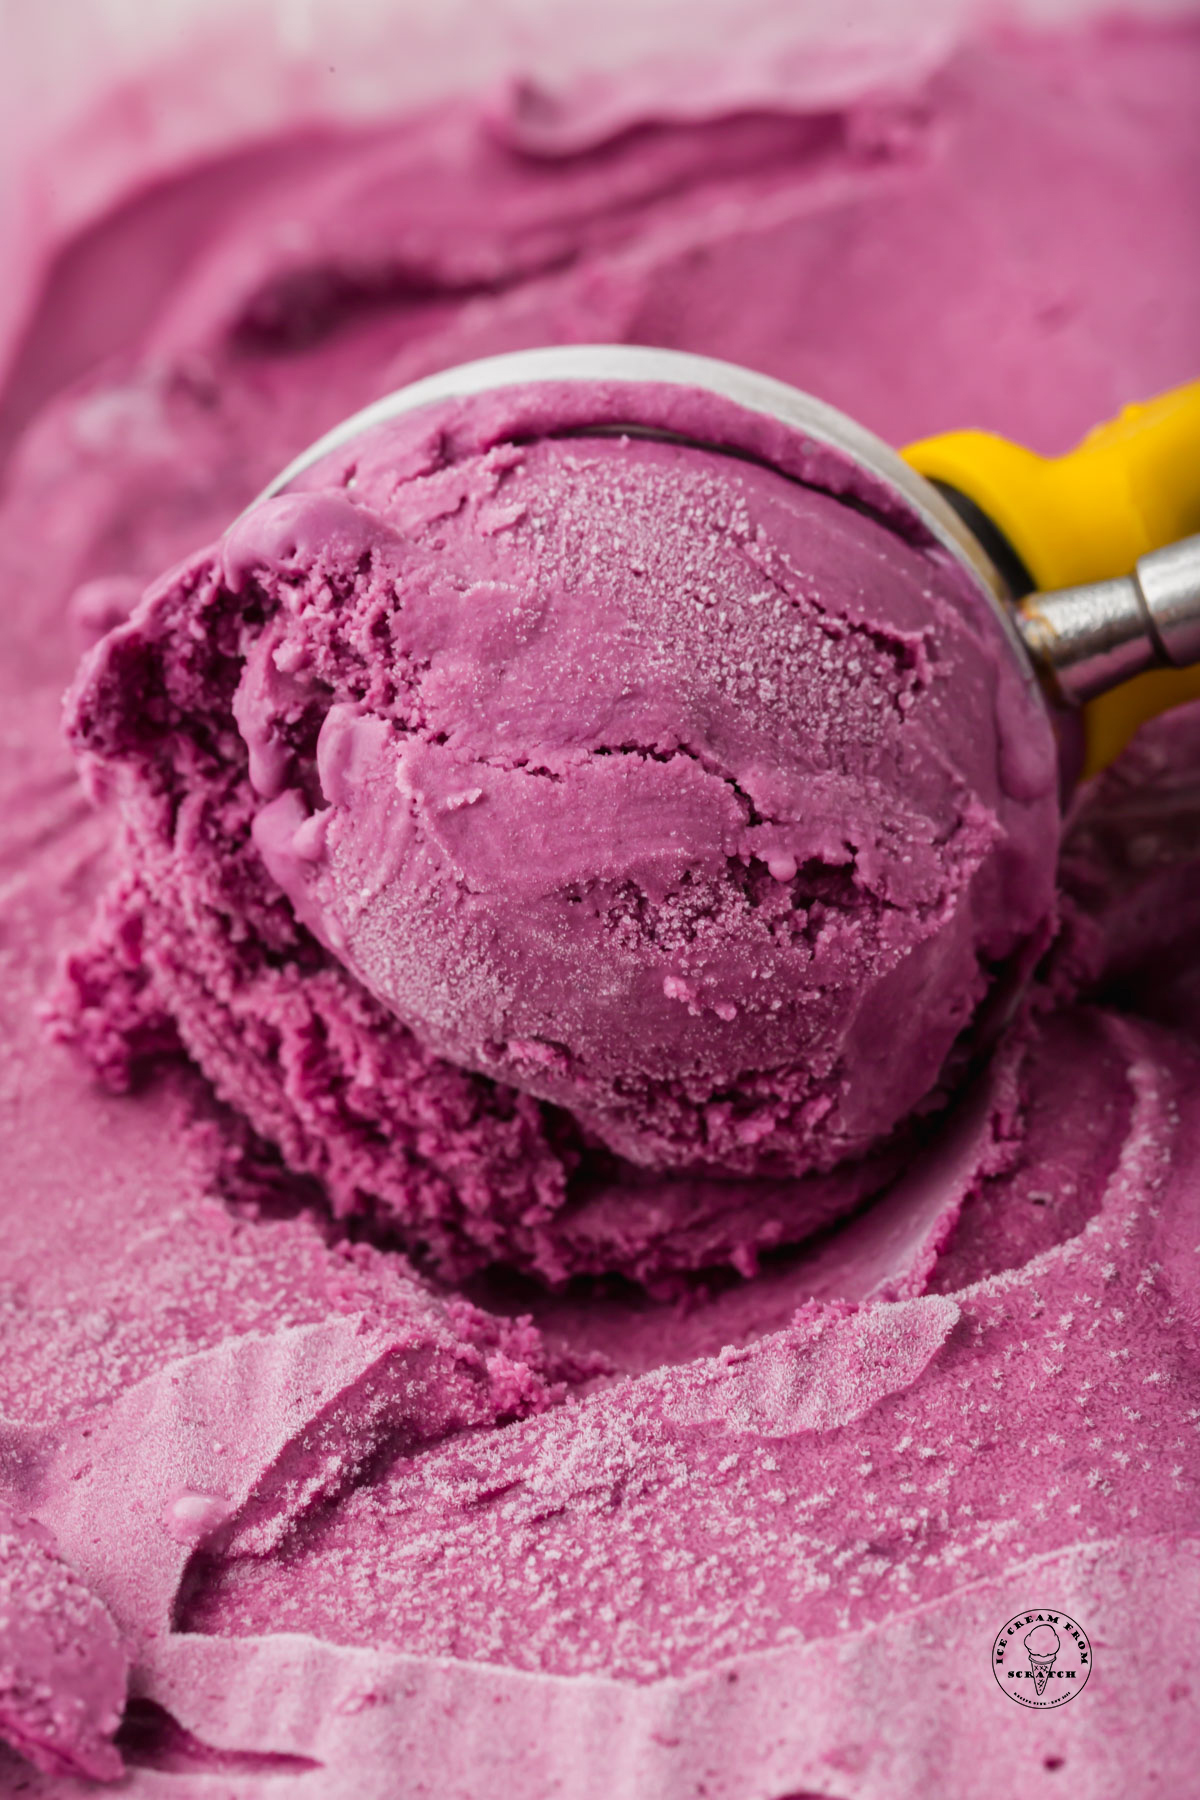 Closeup view of a scoop of homemade blackberry ice cream